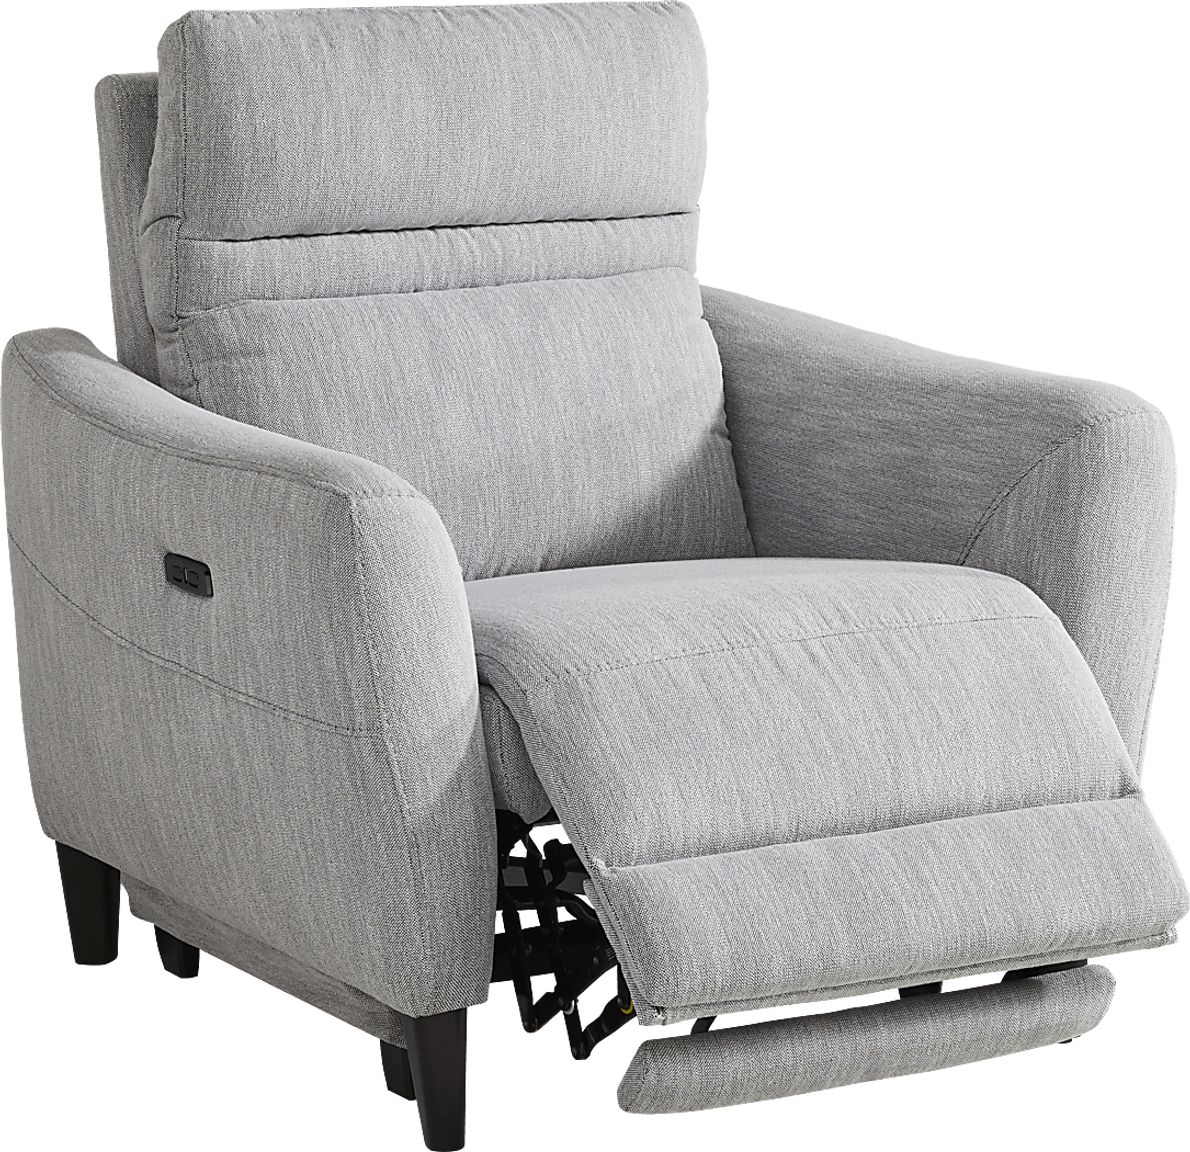 Corby Lane Platinum Dual Power Recliner - Rooms To Go